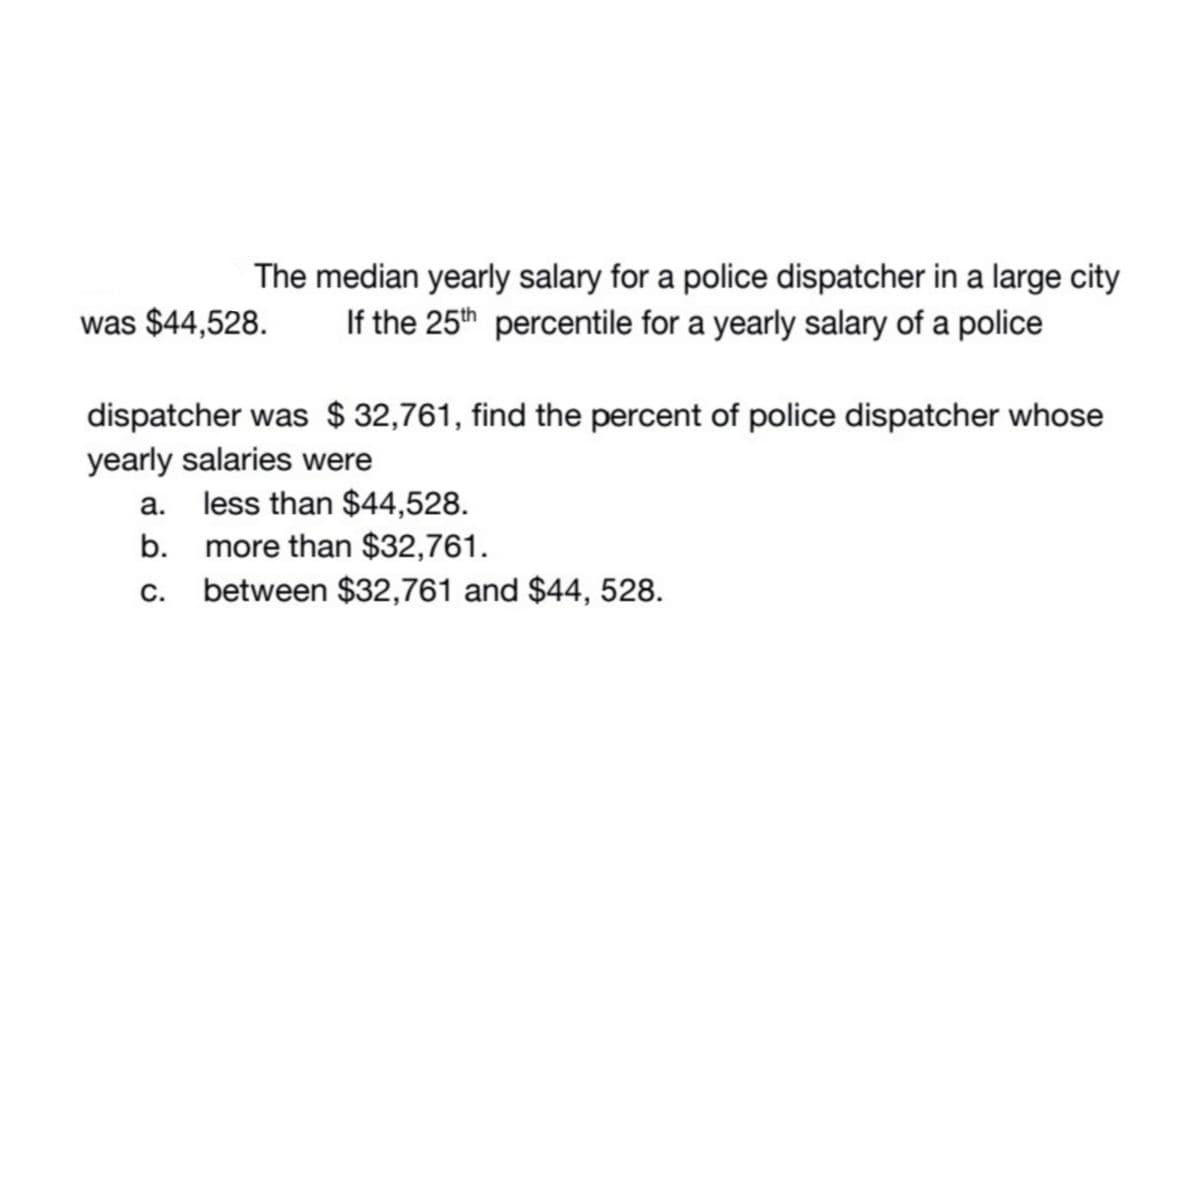 The median yearly salary for a police dispatcher in a large city
If the 25th percentile for a yearly salary of a police
was $44,528.
dispatcher was $32,761, find the percent of police dispatcher whose
yearly salaries were
a. less than $44,528.
b.
more than $32,761.
C. between $32,761 and $44, 528.